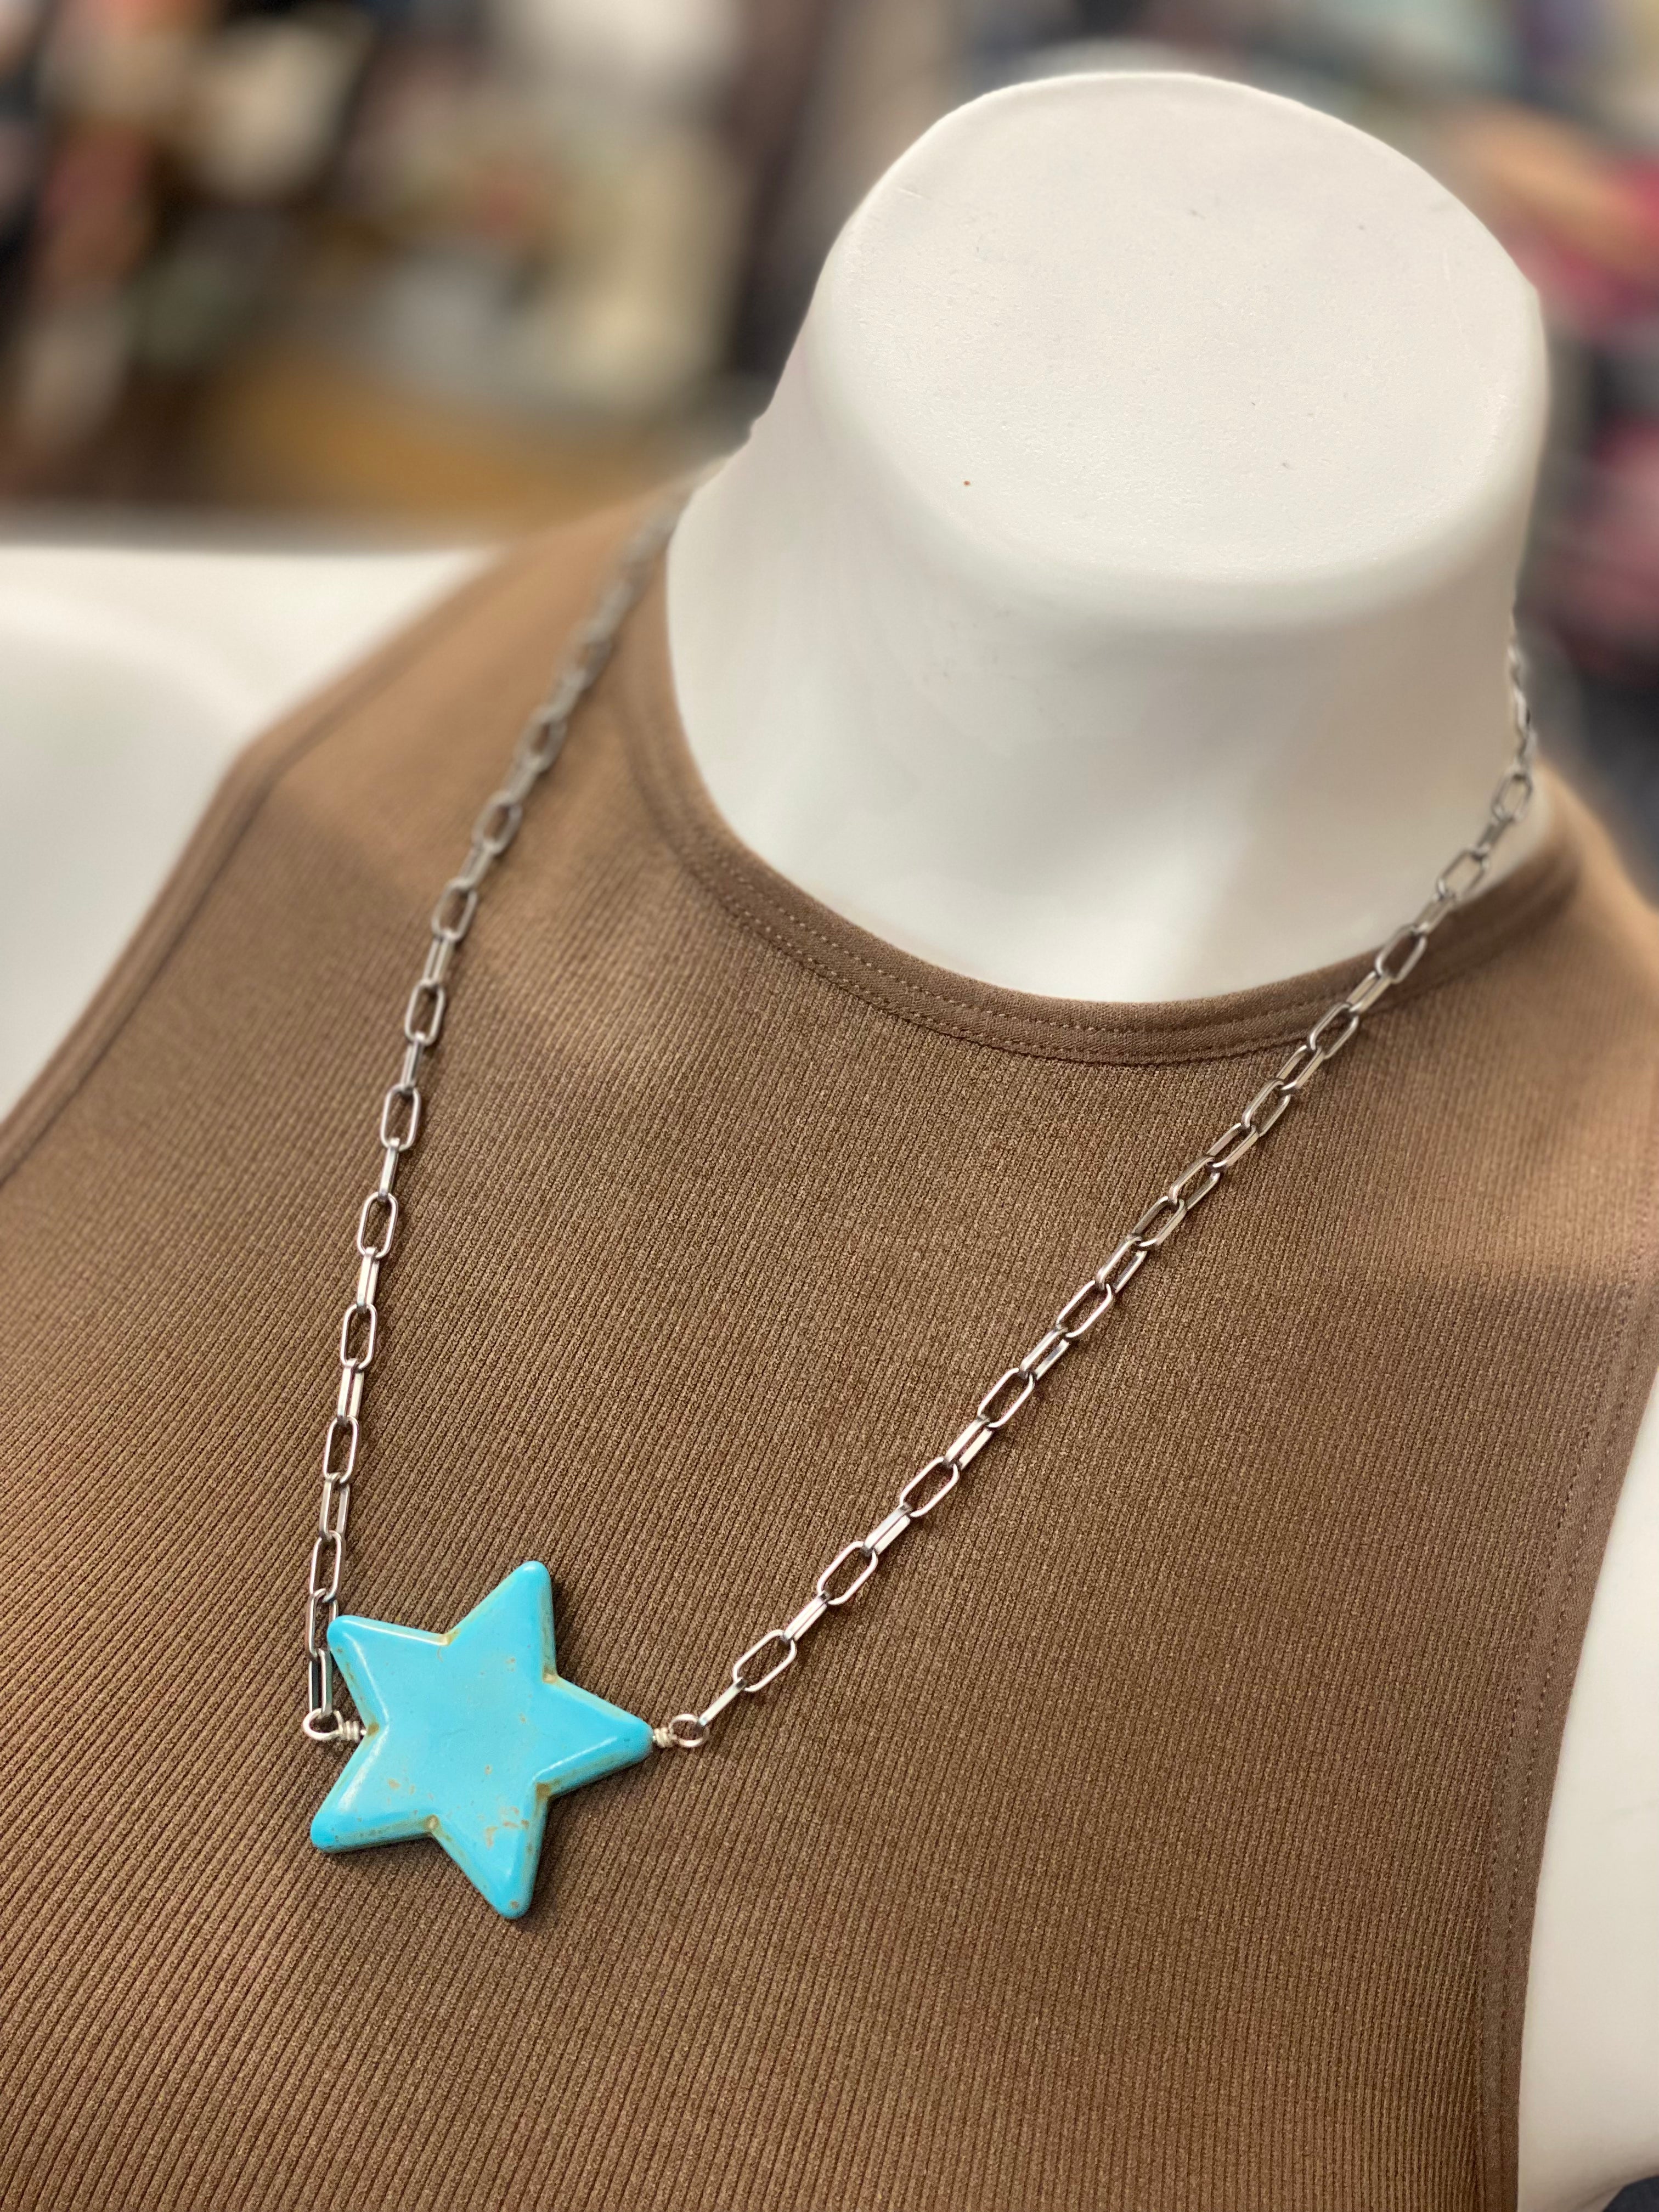 Large Turquoise Star Necklace w/ Paperclip Chain